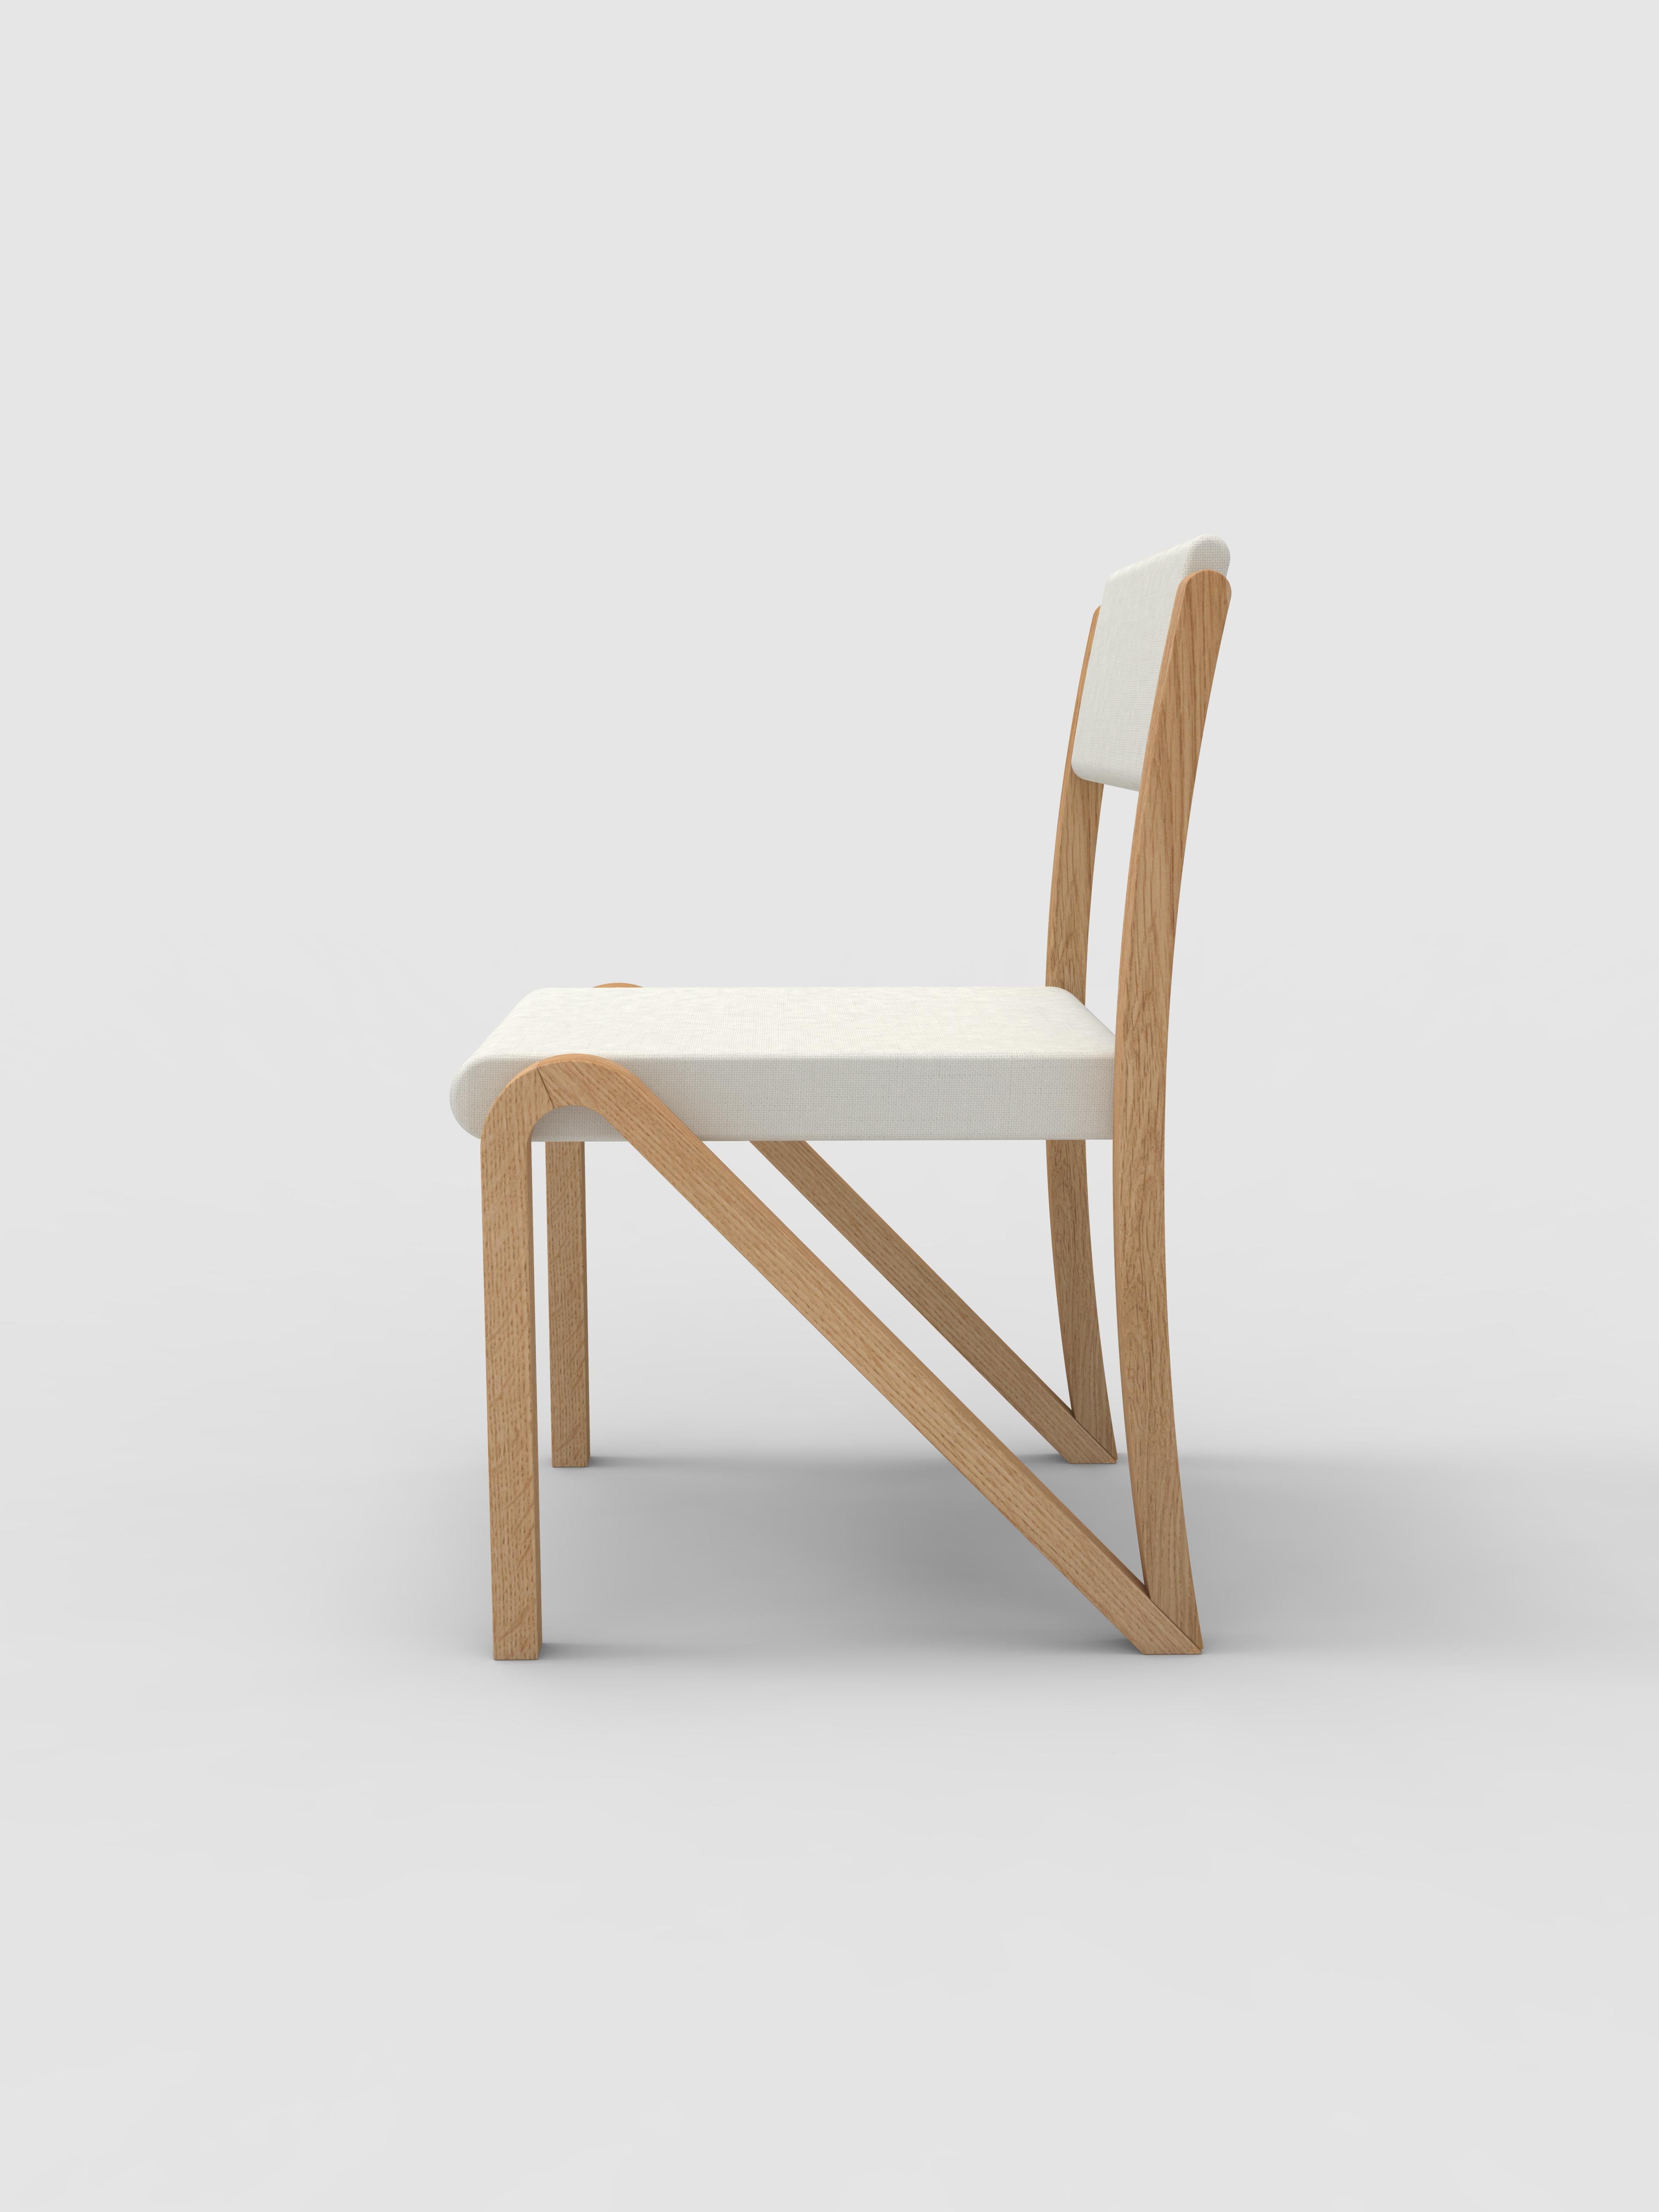 Orphan work 200 side chair
Shown in natural oak with upholstered seat and back 
Measures: 19 3/4” D x 17 1/2” W x 31” H
Available in natural oak or blackened oak
COM only 

Orphan work is designed to complement in the heart of Soho, New York